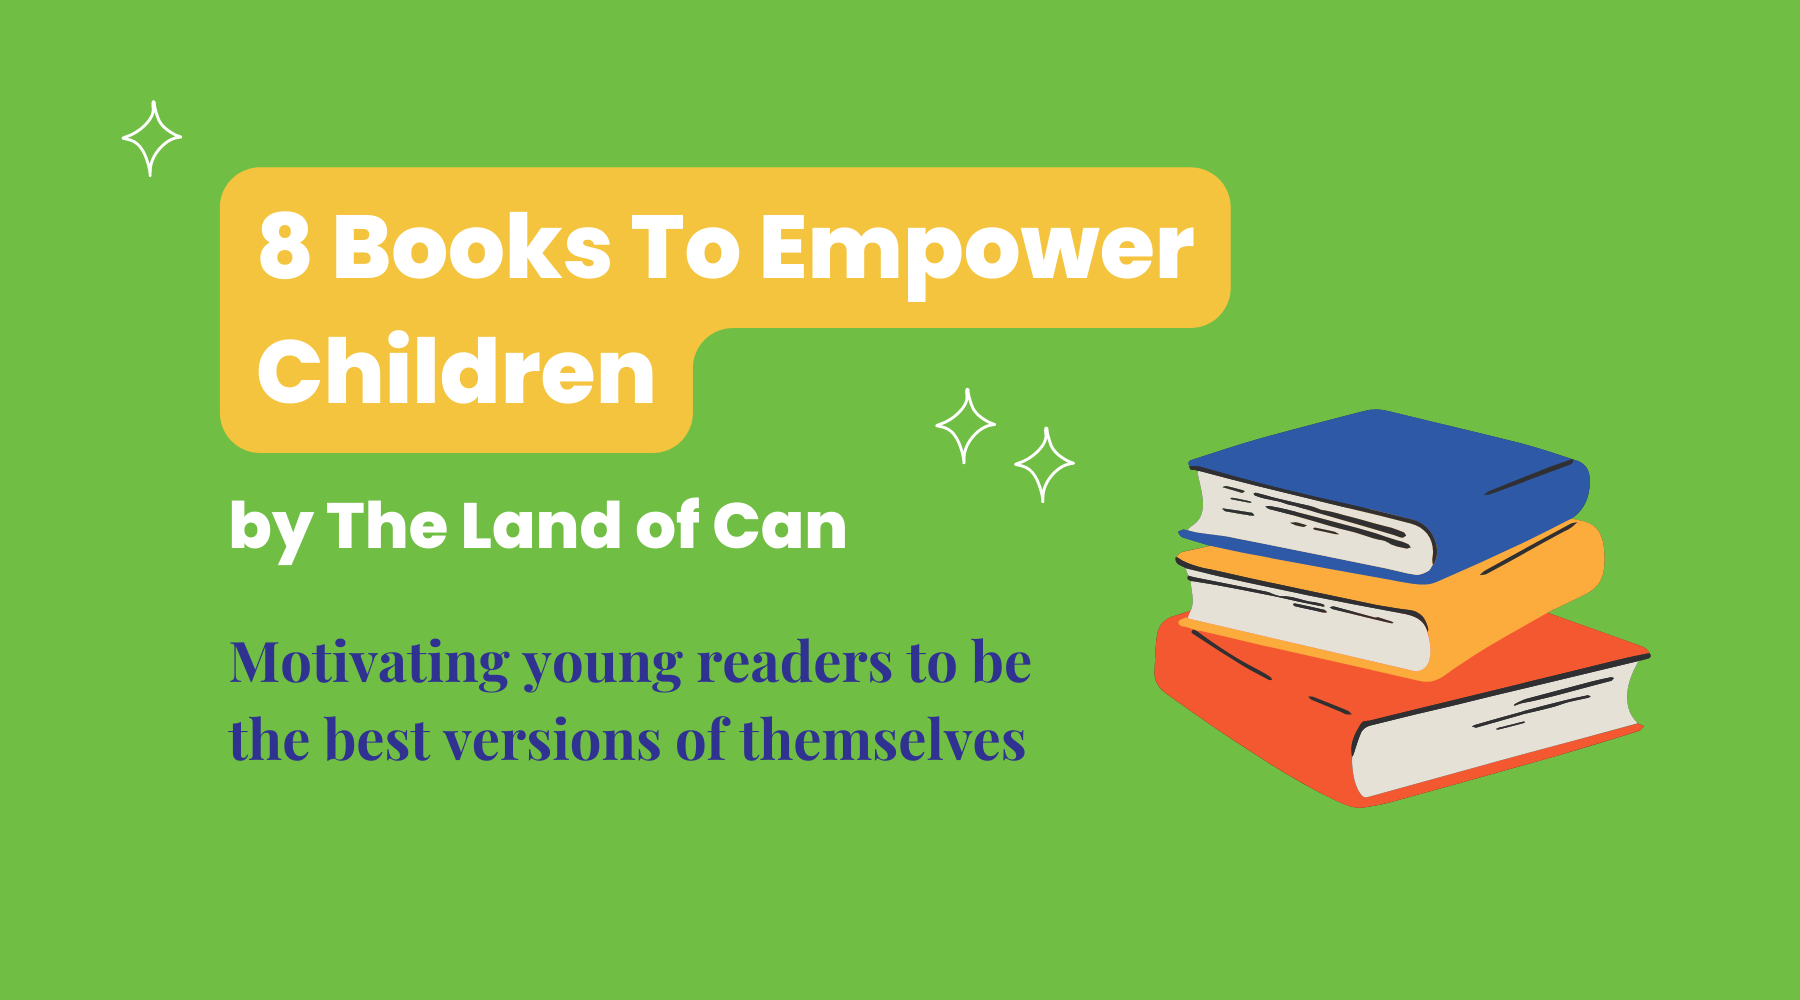 The Land of Can - Empowers Kids with Its Range of Educational Books